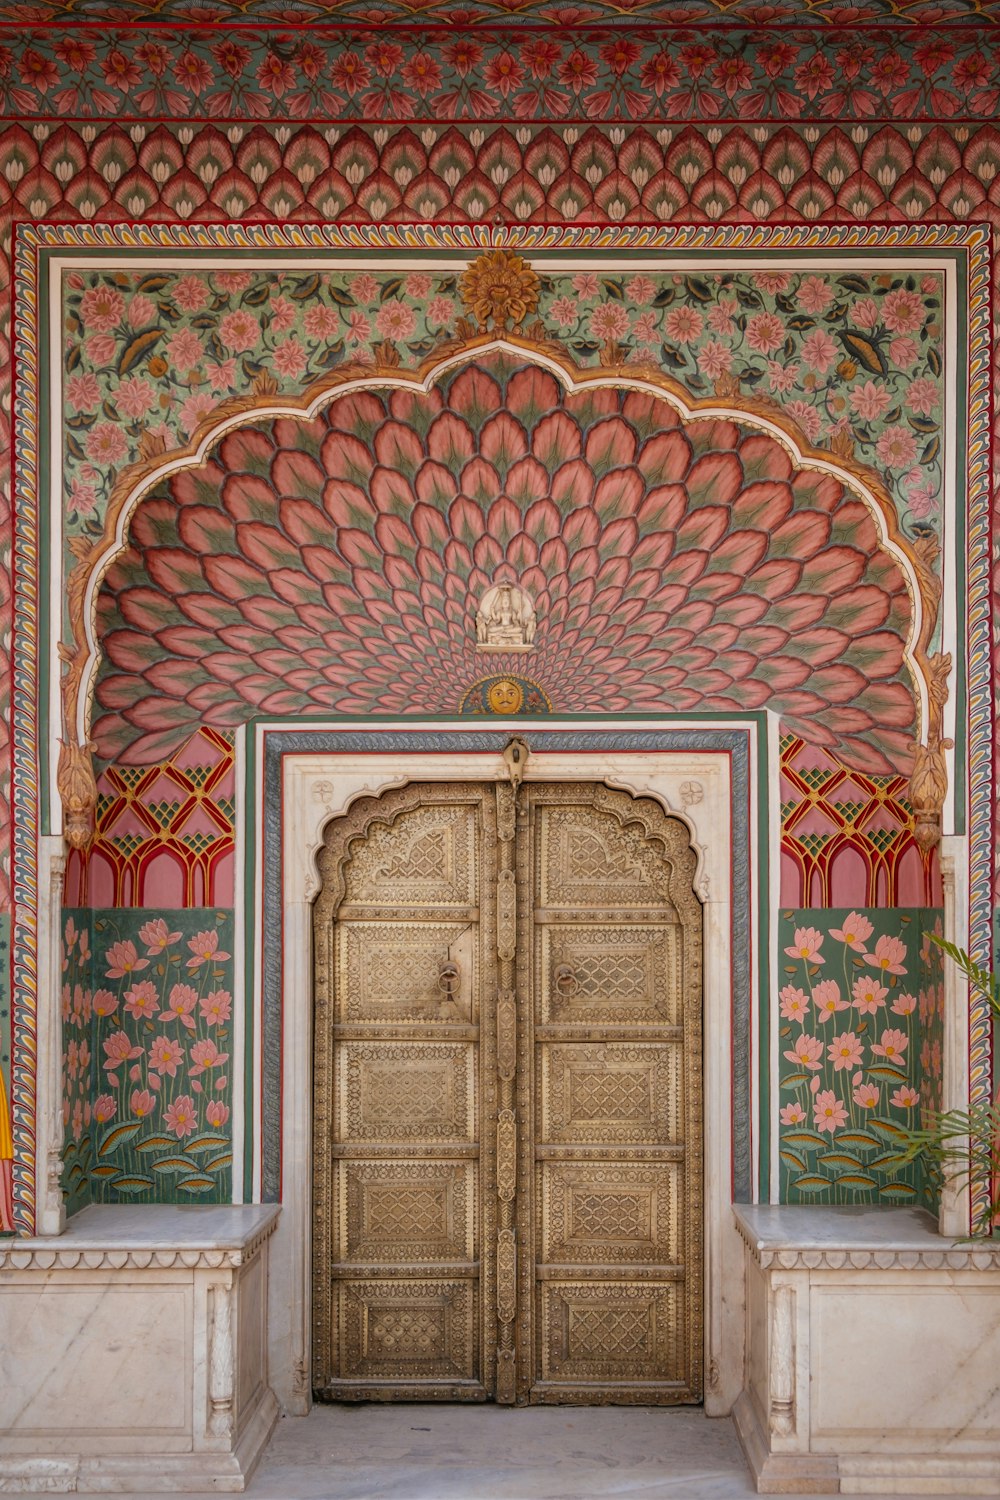 a large wooden door in a colorful building